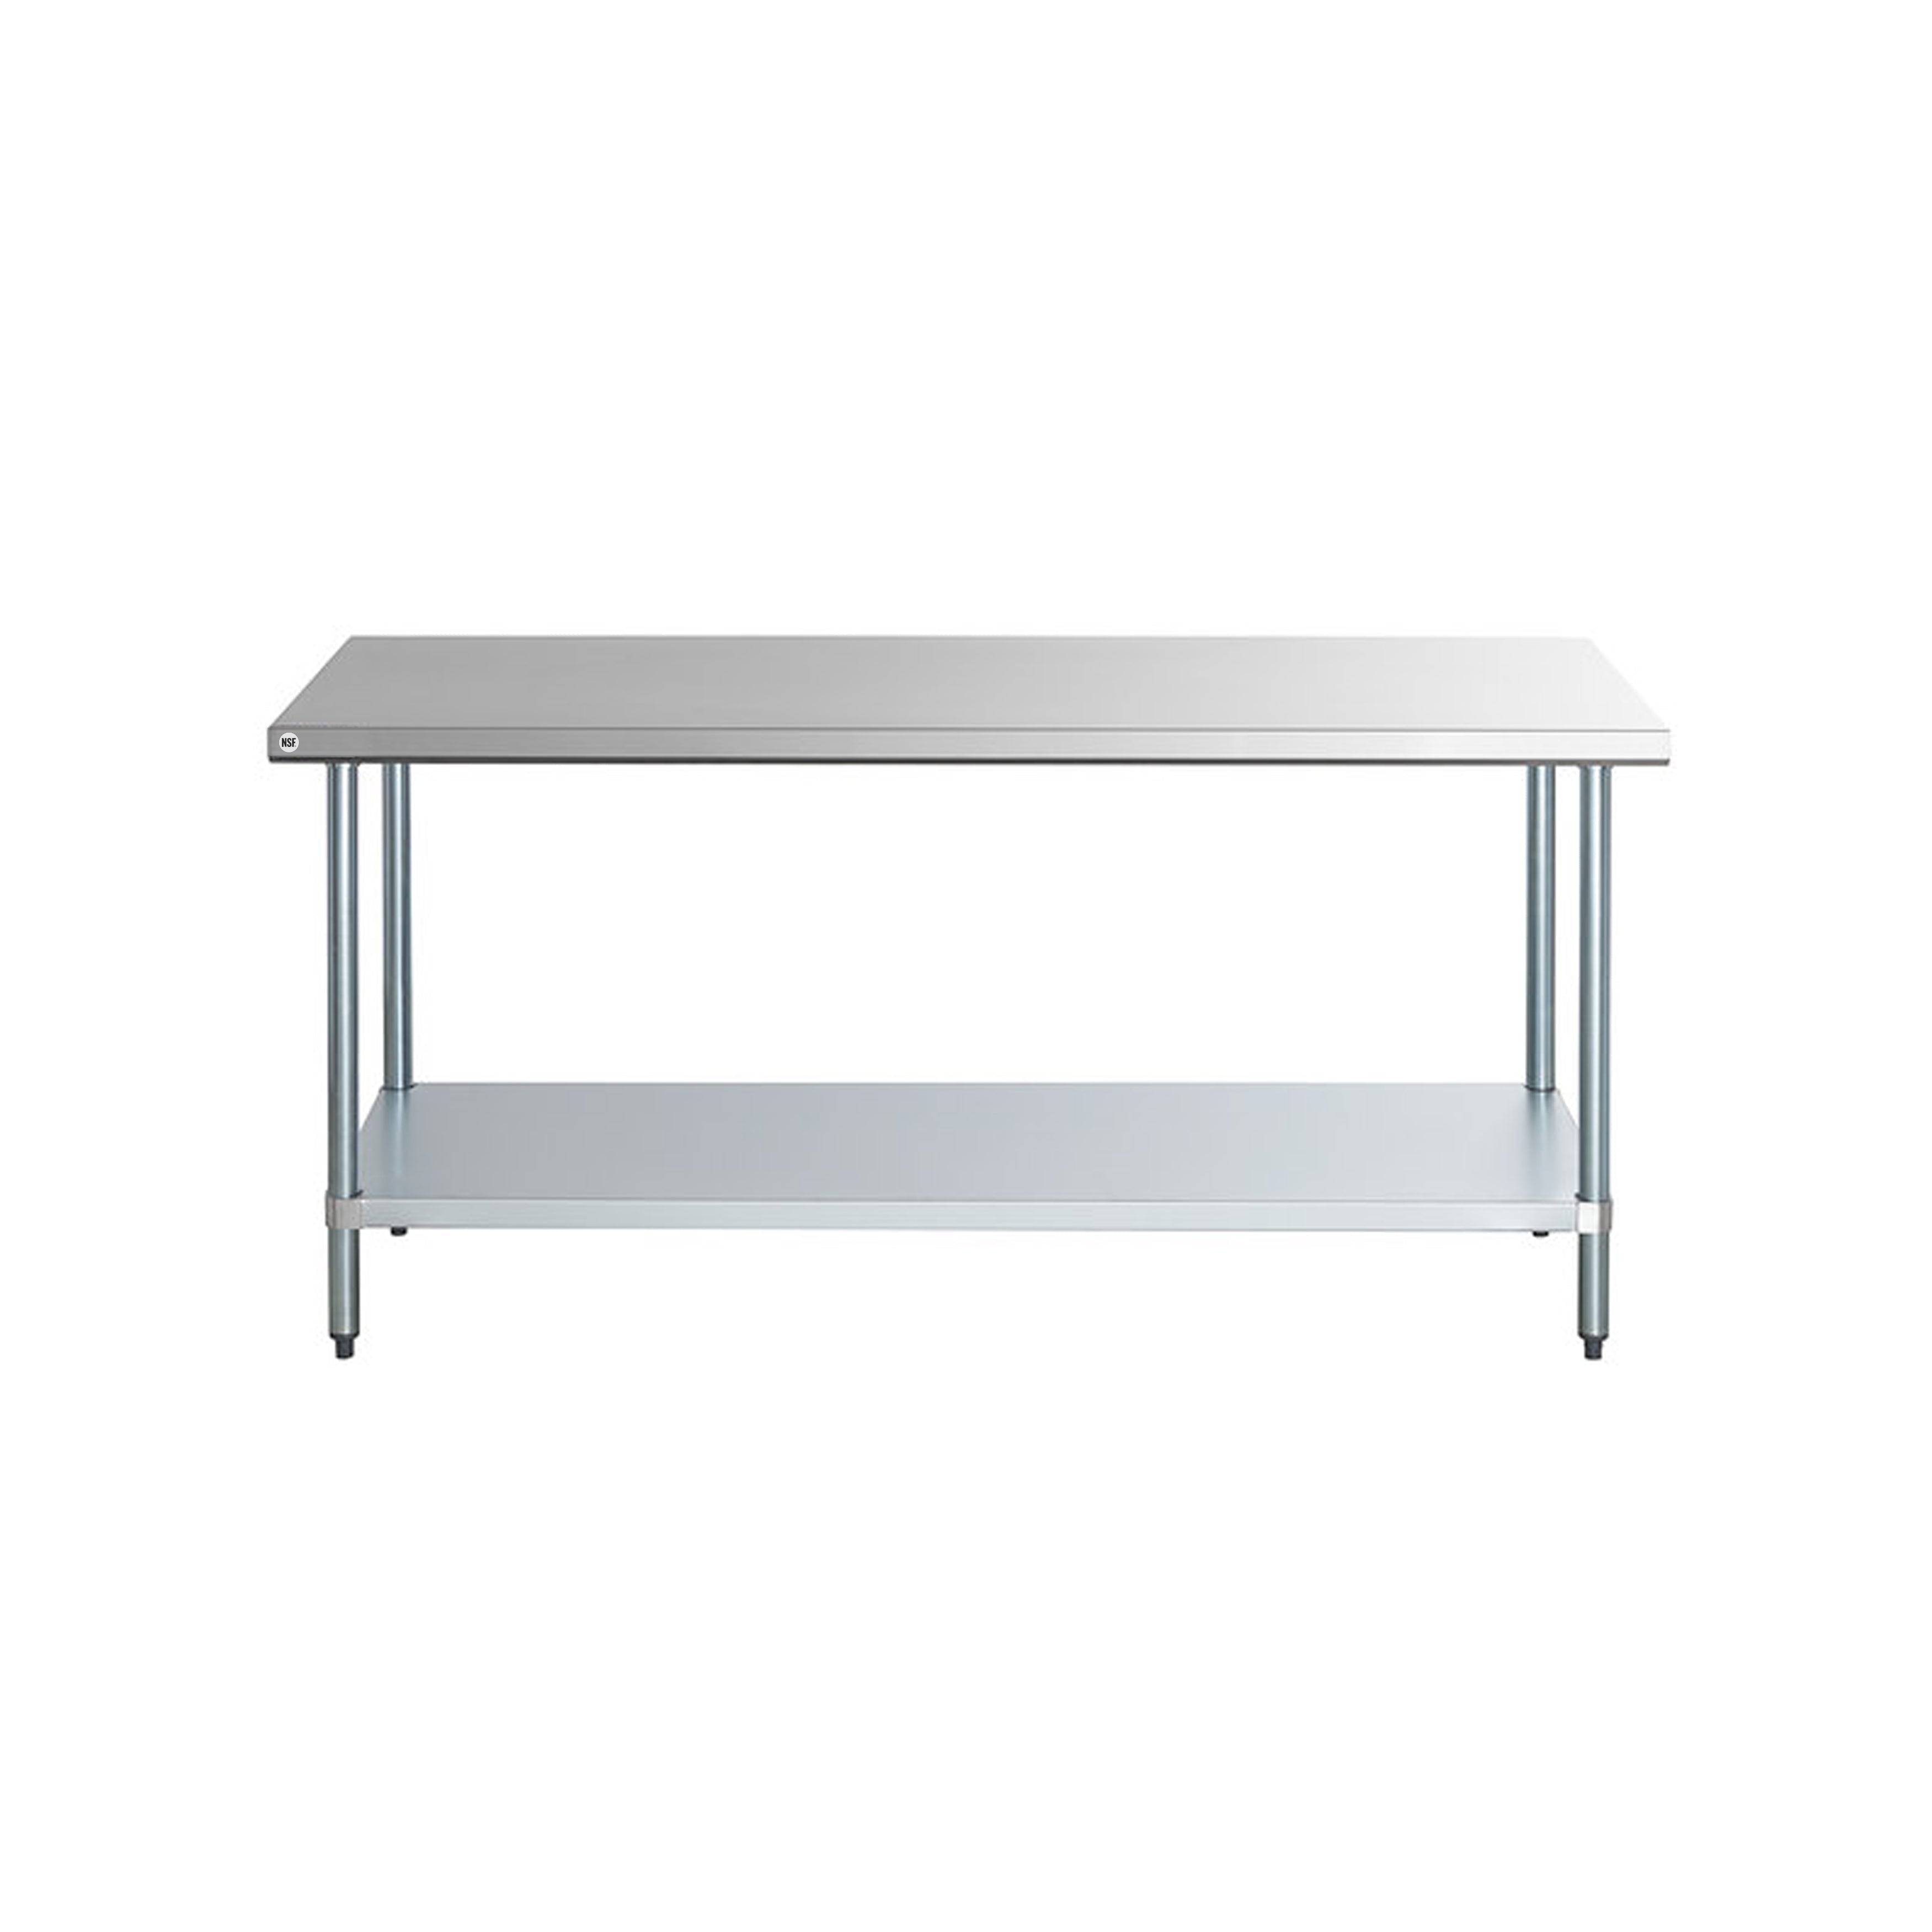 Omcan - 18854, Commercial 96" x 24" Stainless Steel Kitchen Work Table 1600lbs Medium Duty